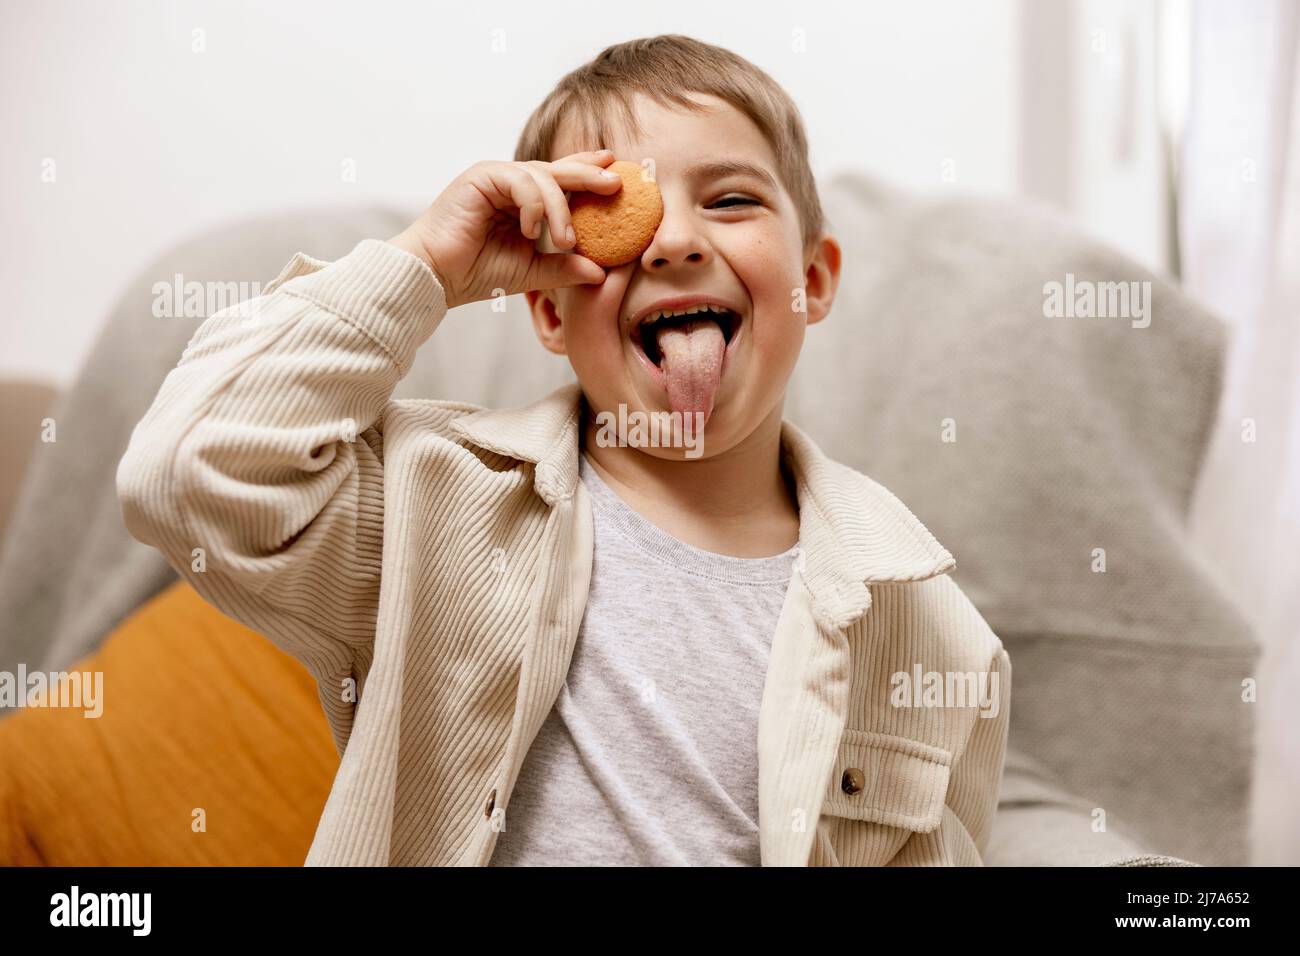 Portrait of little adorable boy holding biscuit. Kid with cookie. Child and gluten. Healthcare, gluten intolerance by kids. Preschool child with Stock Photo